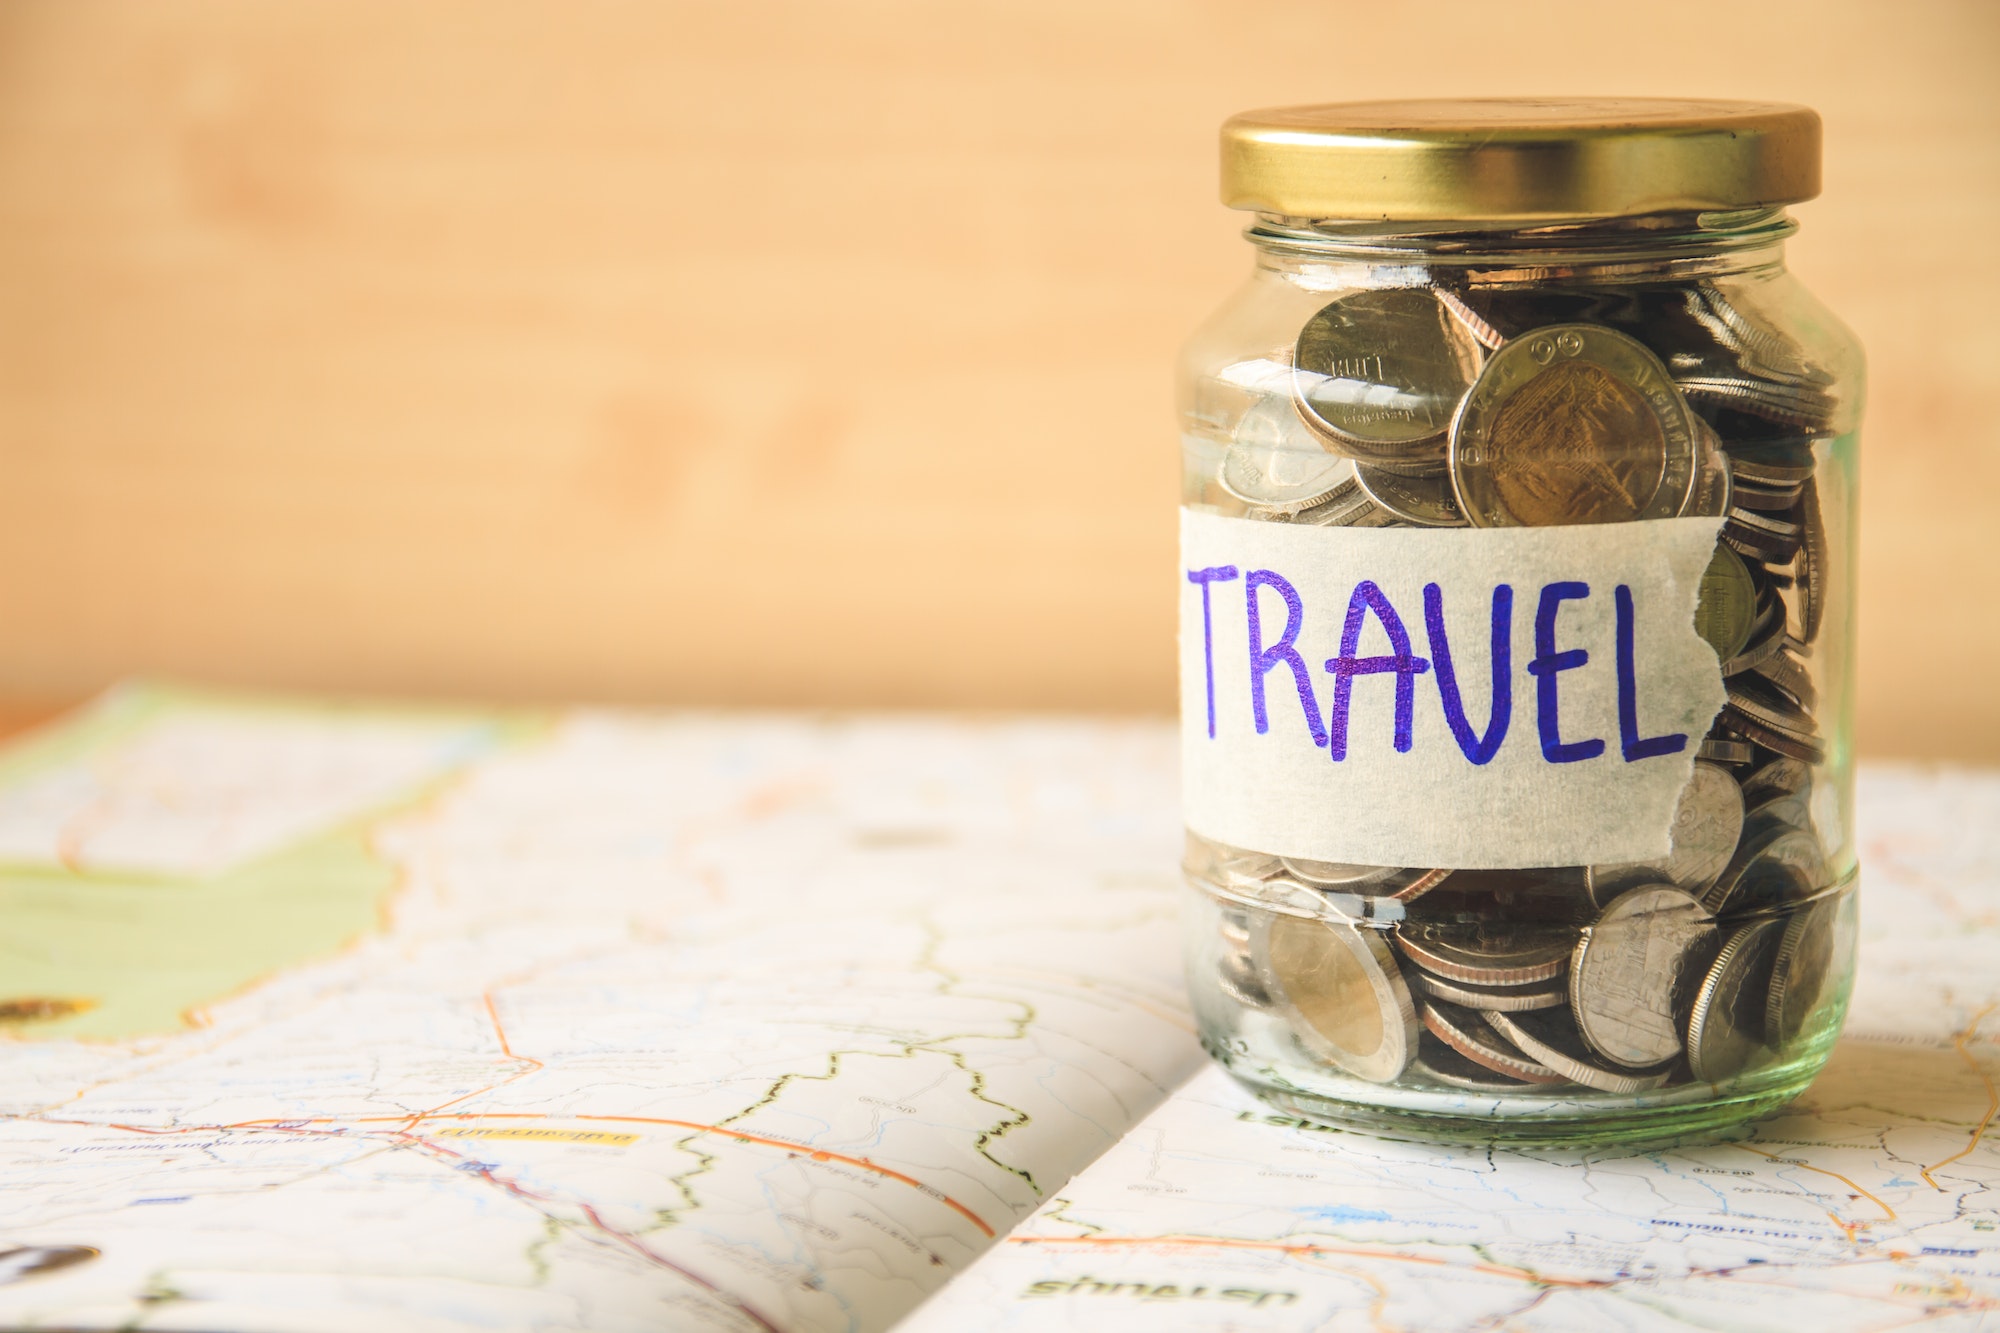 The Top 5 Recommended Travel Insurance Services